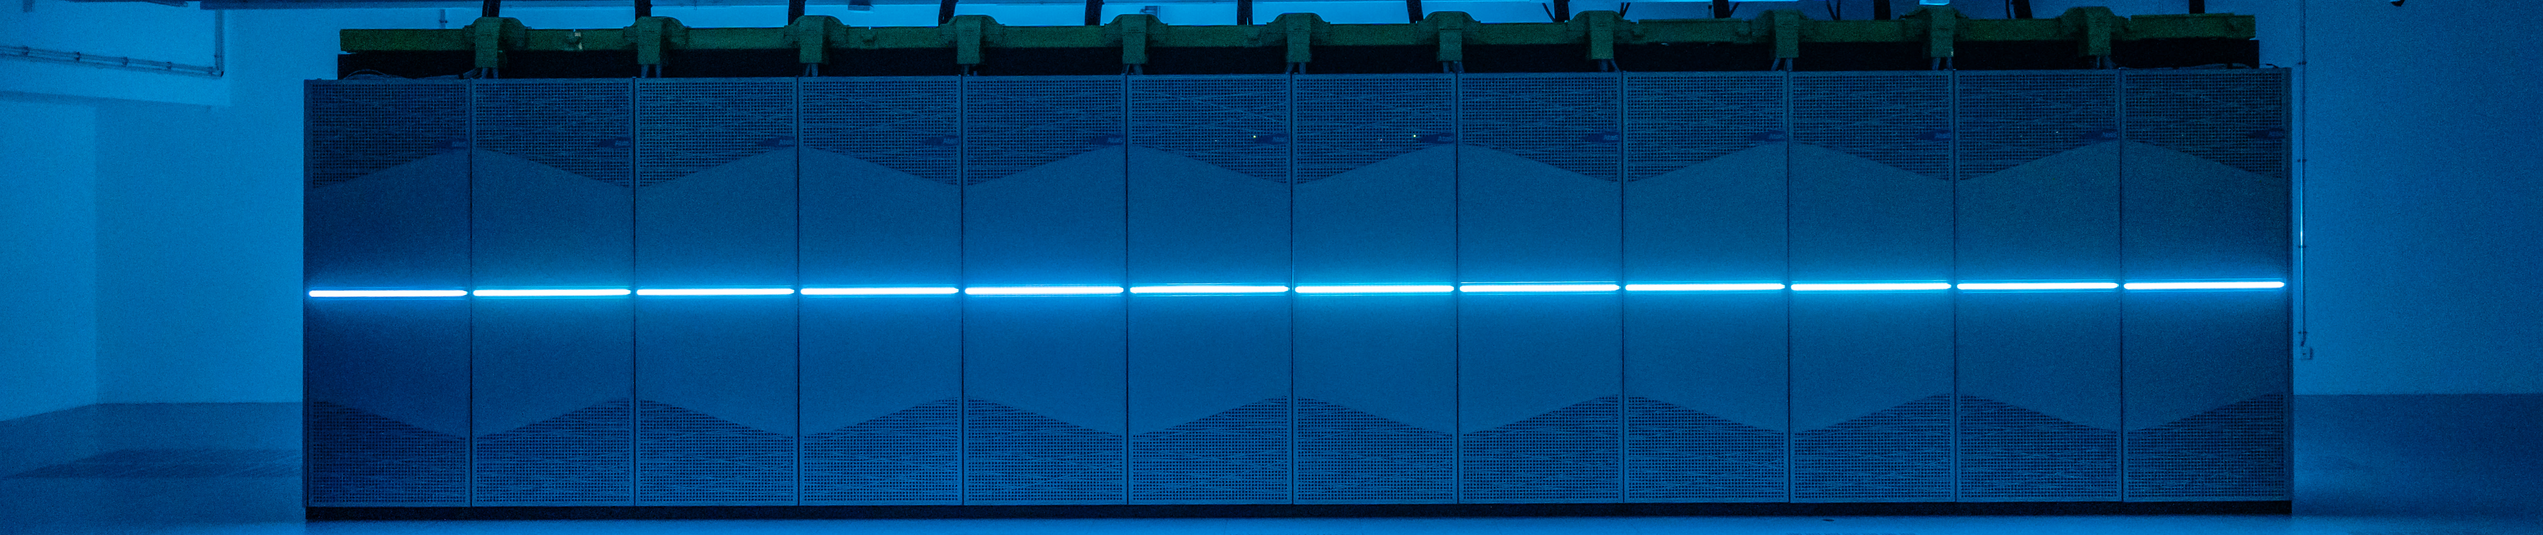 Supercomputer with blue light